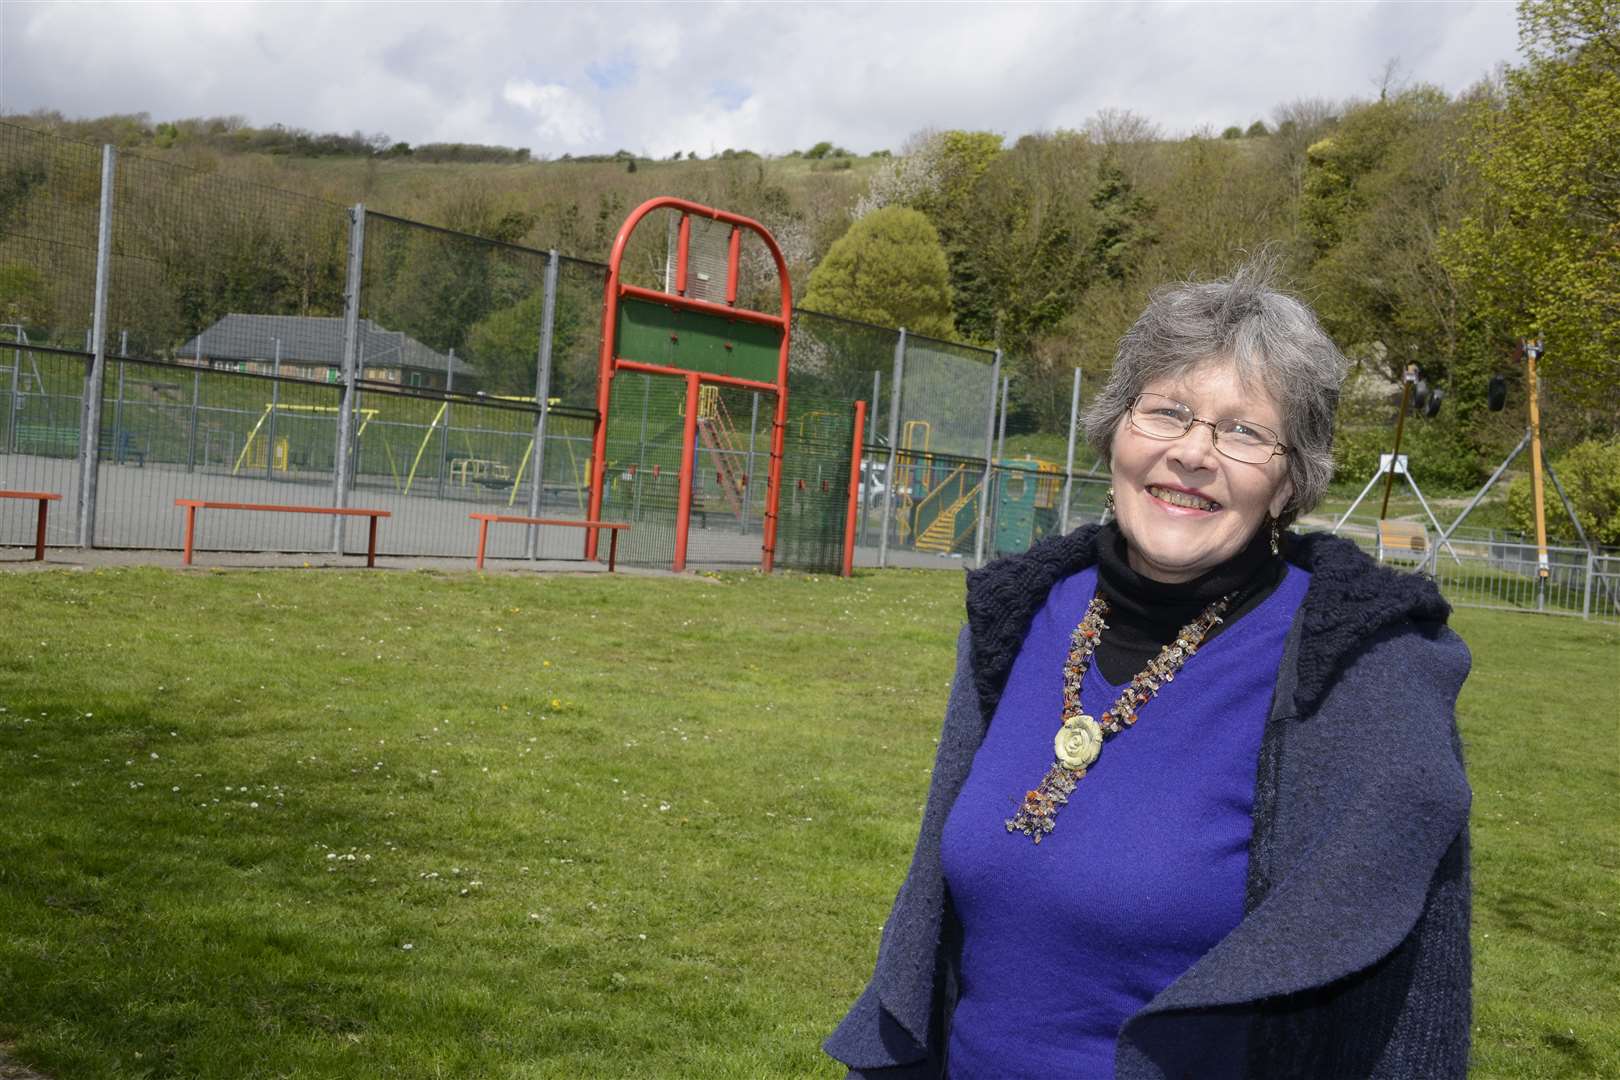 Geraldine Aldridge has called for a skate park to be built next to the Elms Vale recreation ground.